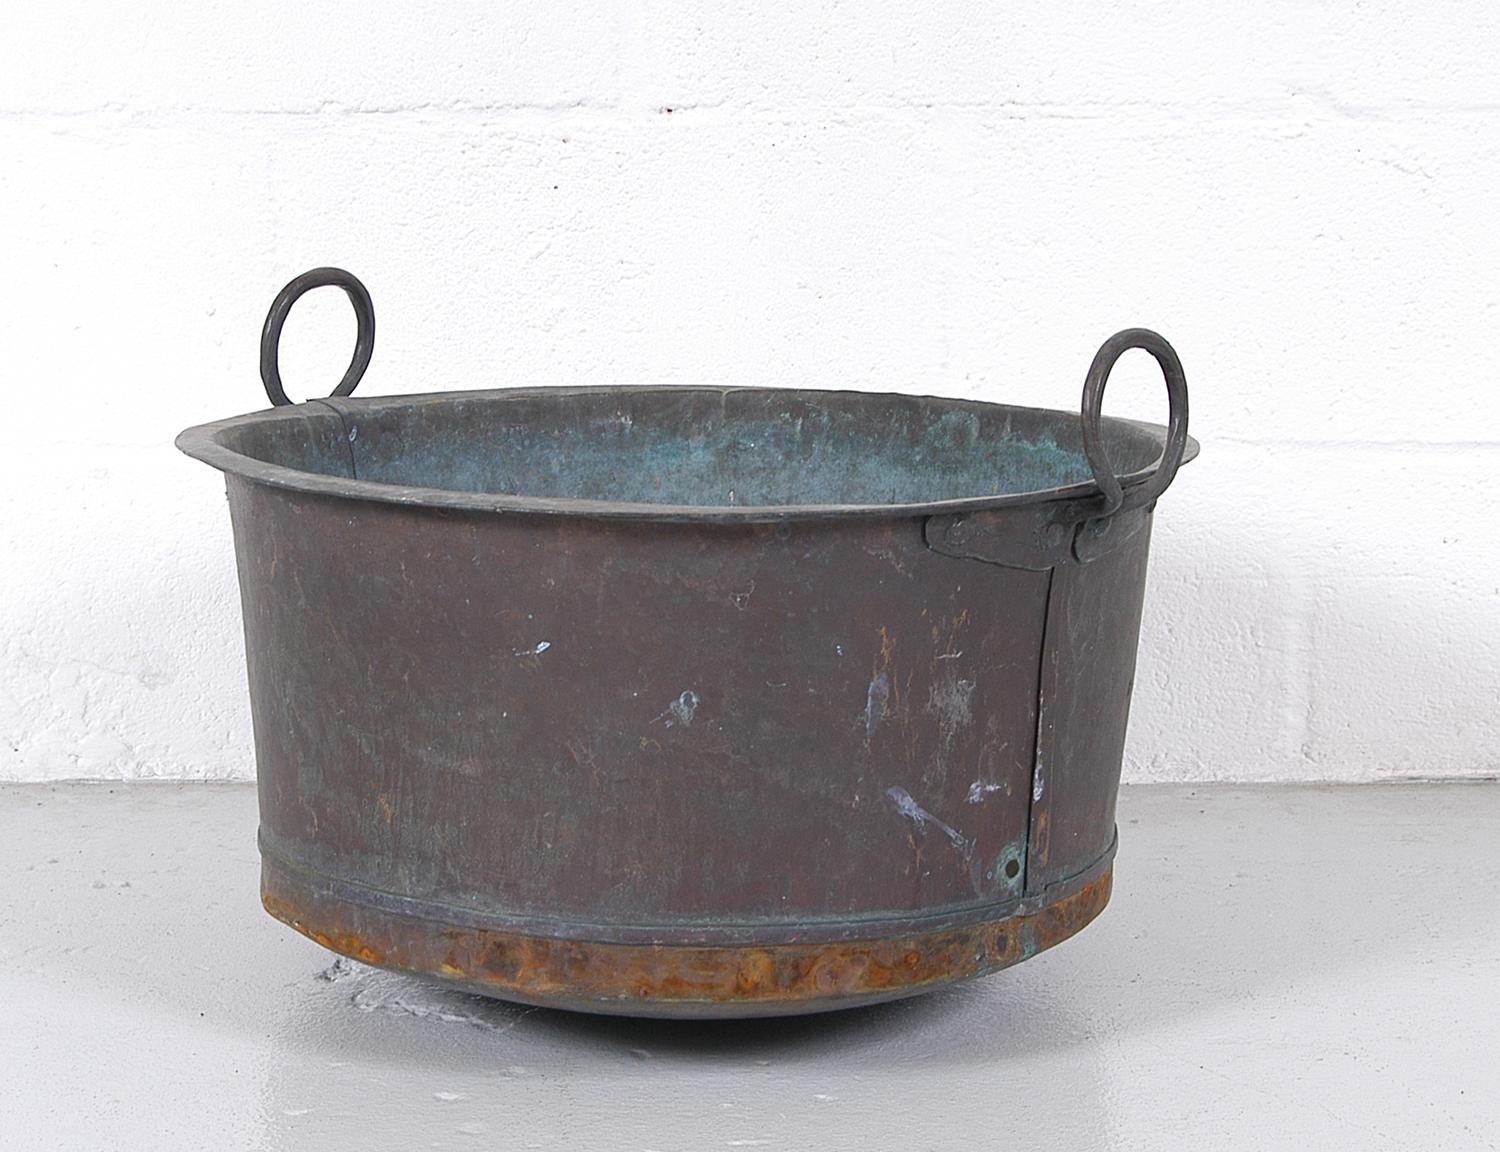 Antique Swedish laundry tub made from hand beaten copper with twin circular wrought copper handles, with great verdigris patina. This would have originally sat on a steel tripod base, but is now a versatile and useful garden planter. Alternatively